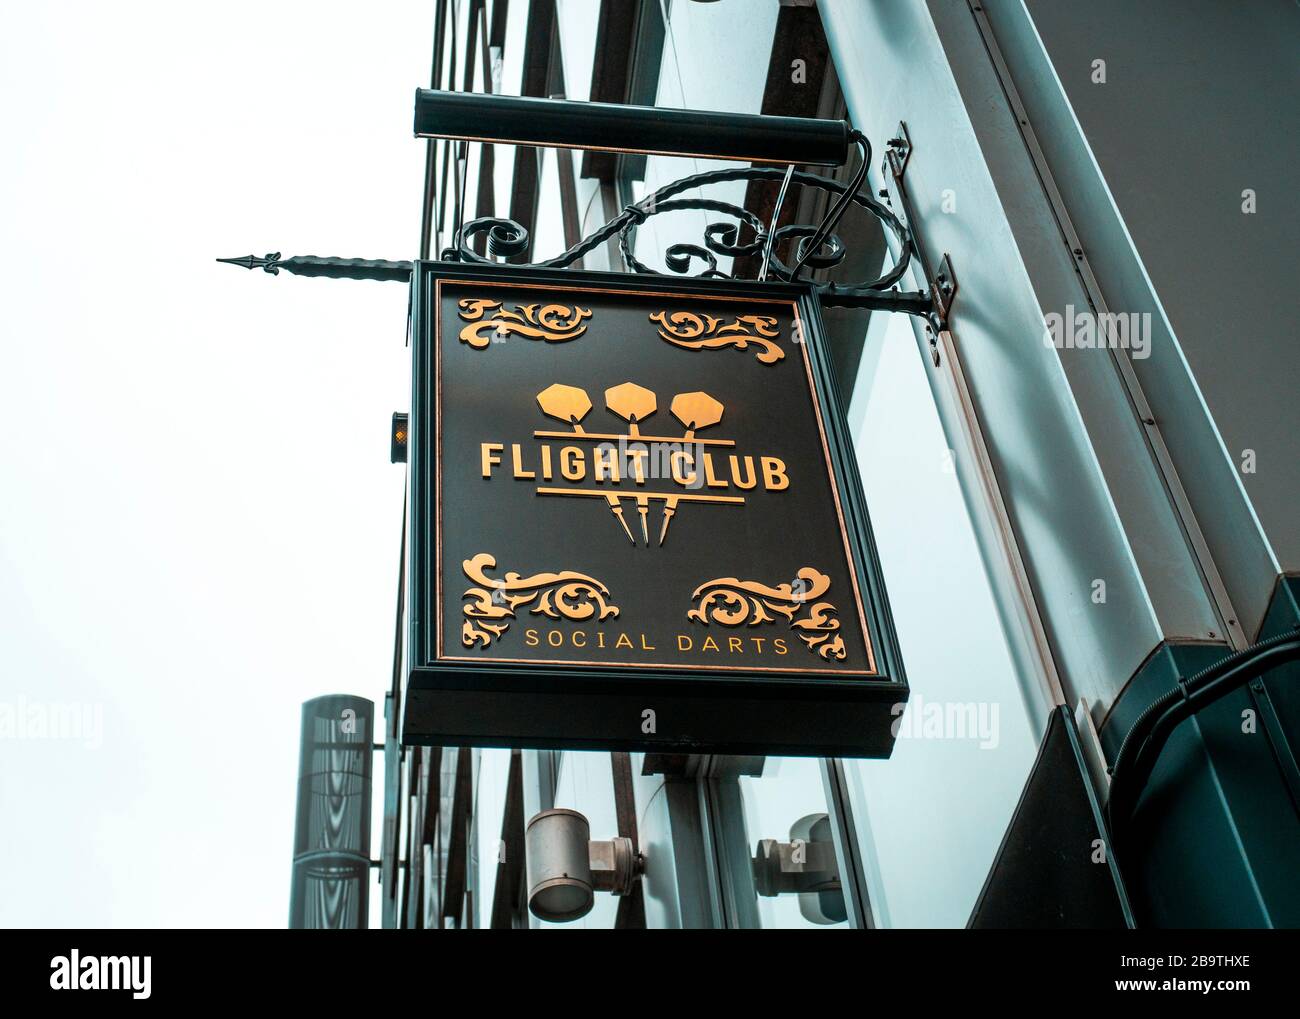 Flight Club, A chain of pubs where customers play Social Darts in groups, Founded in 2012 by Steve Moore and Paul Barham Stock Photo